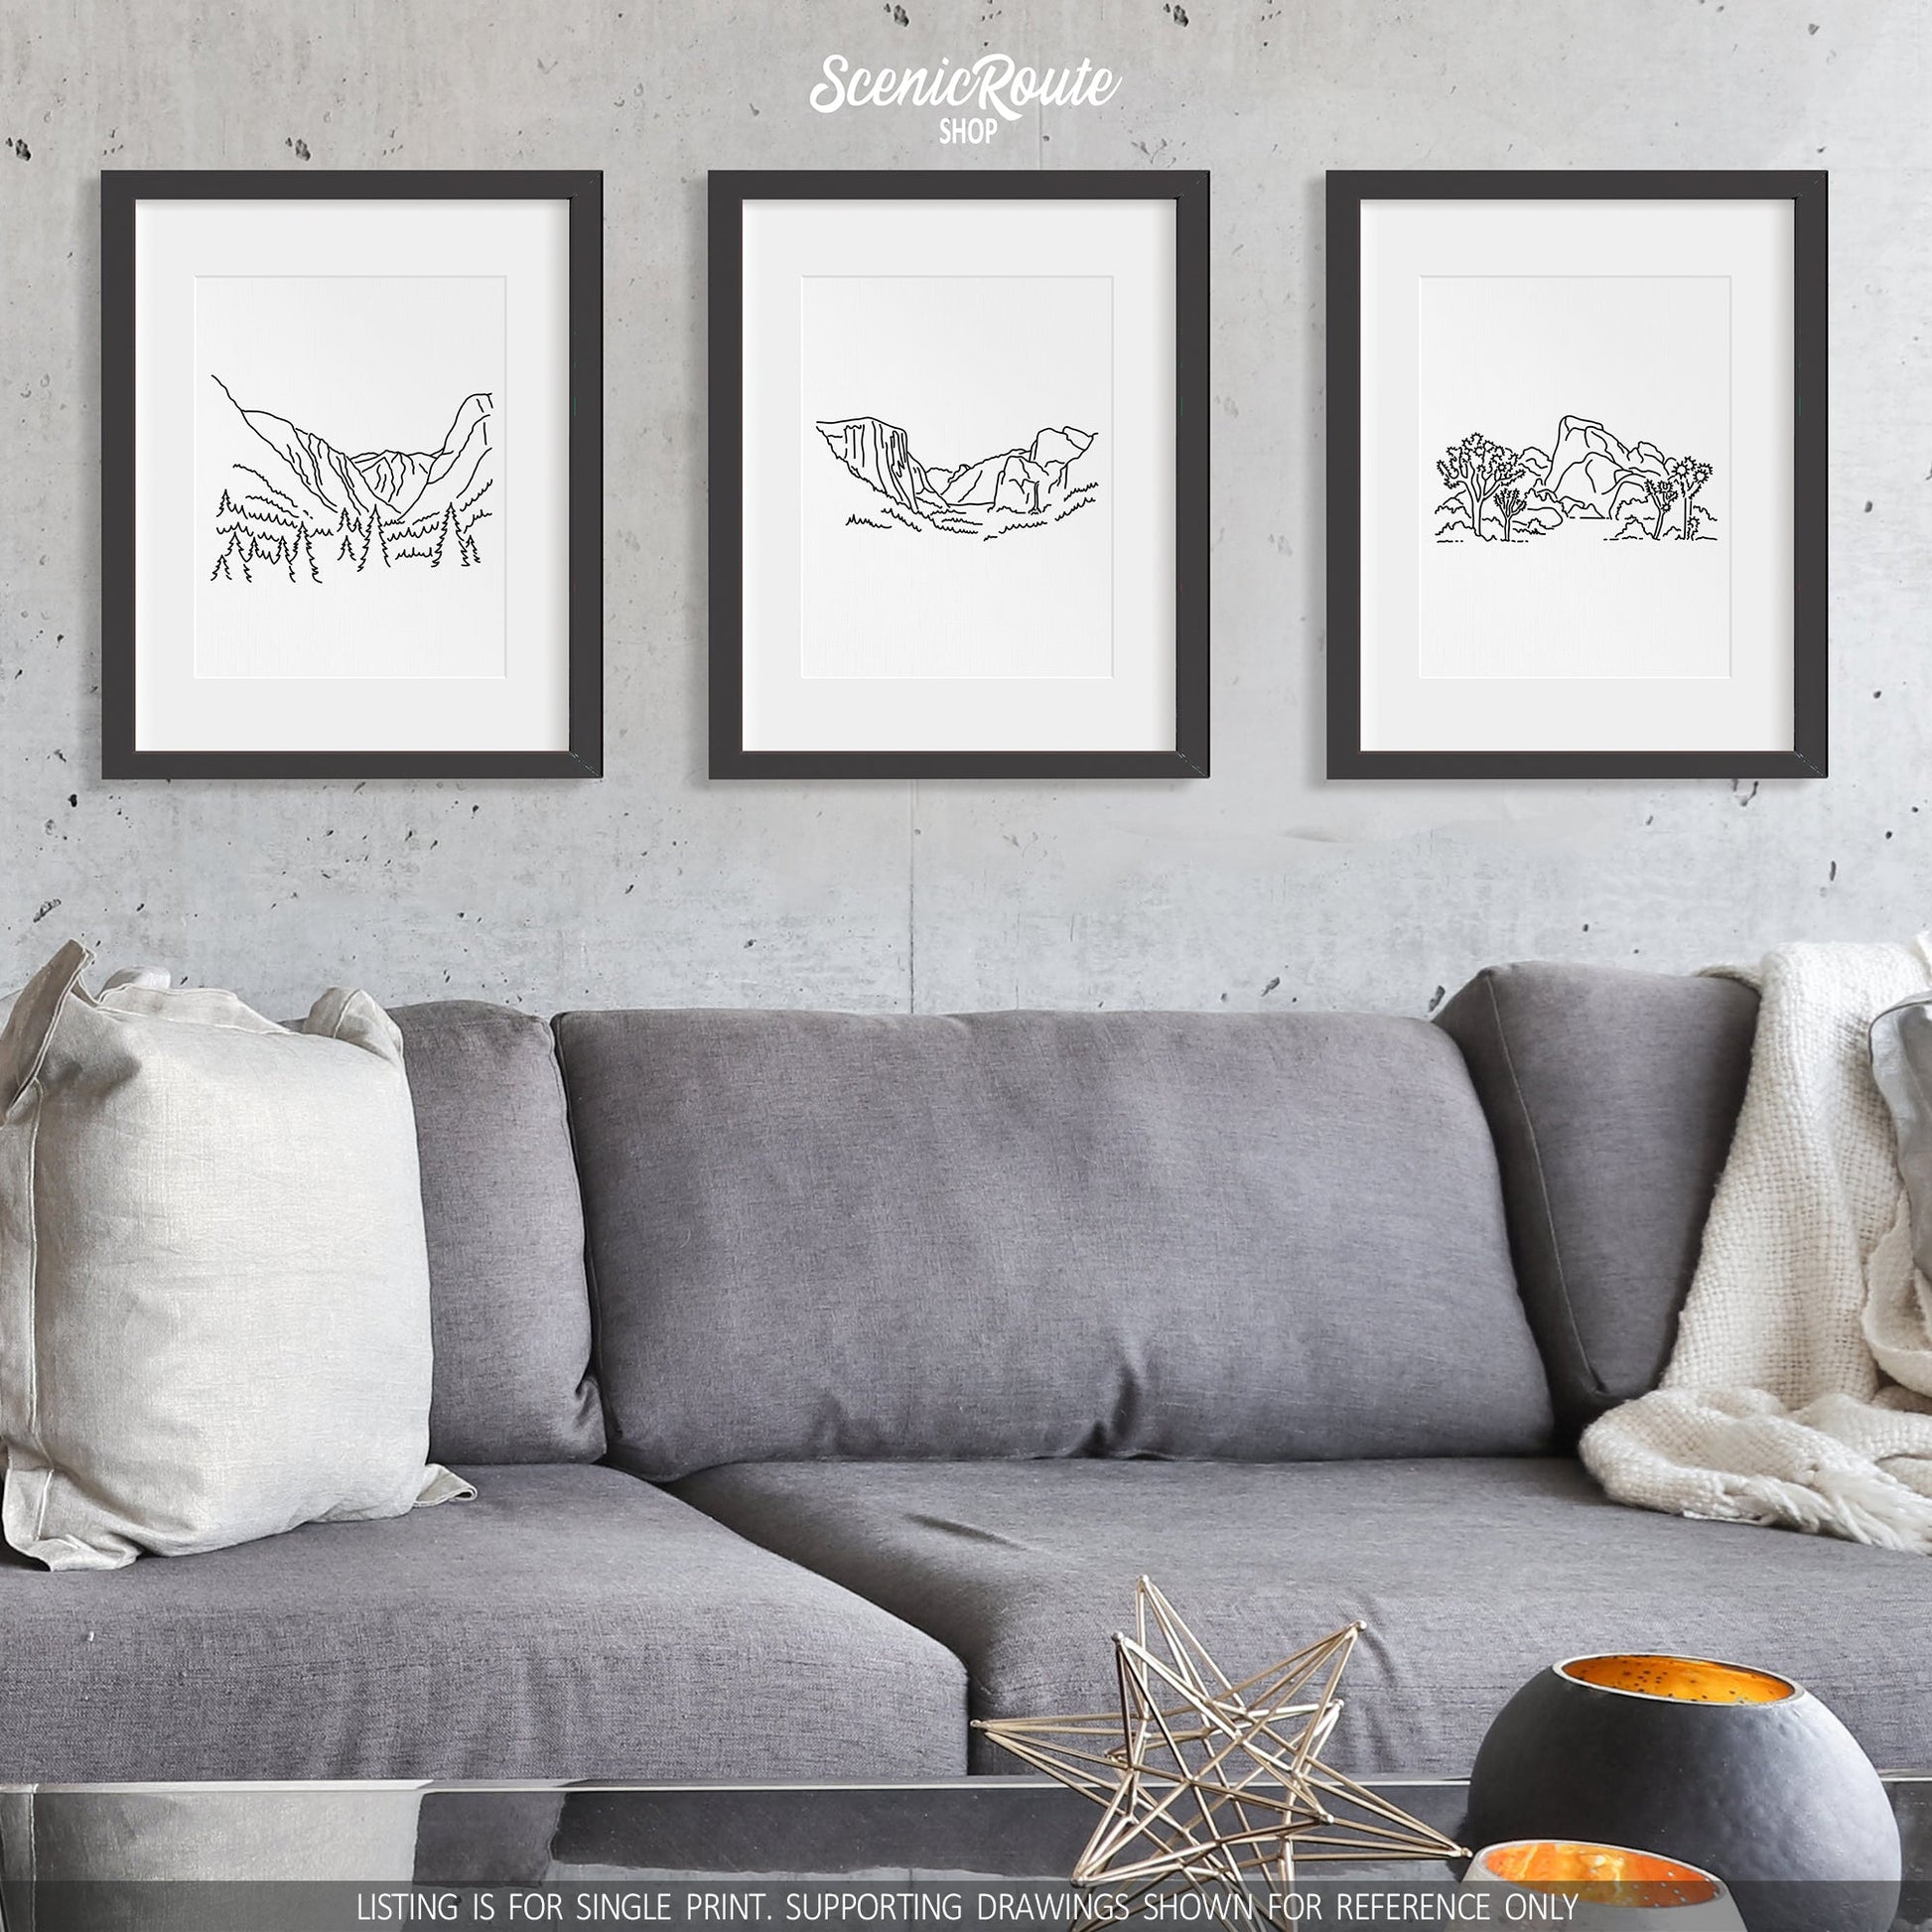 A group of three framed drawings on a wall hanging above a couch with pillows and a blanket. The line art drawings include Kings Canyon National Park, Yosemite National Park, and Joshua Tree National Park